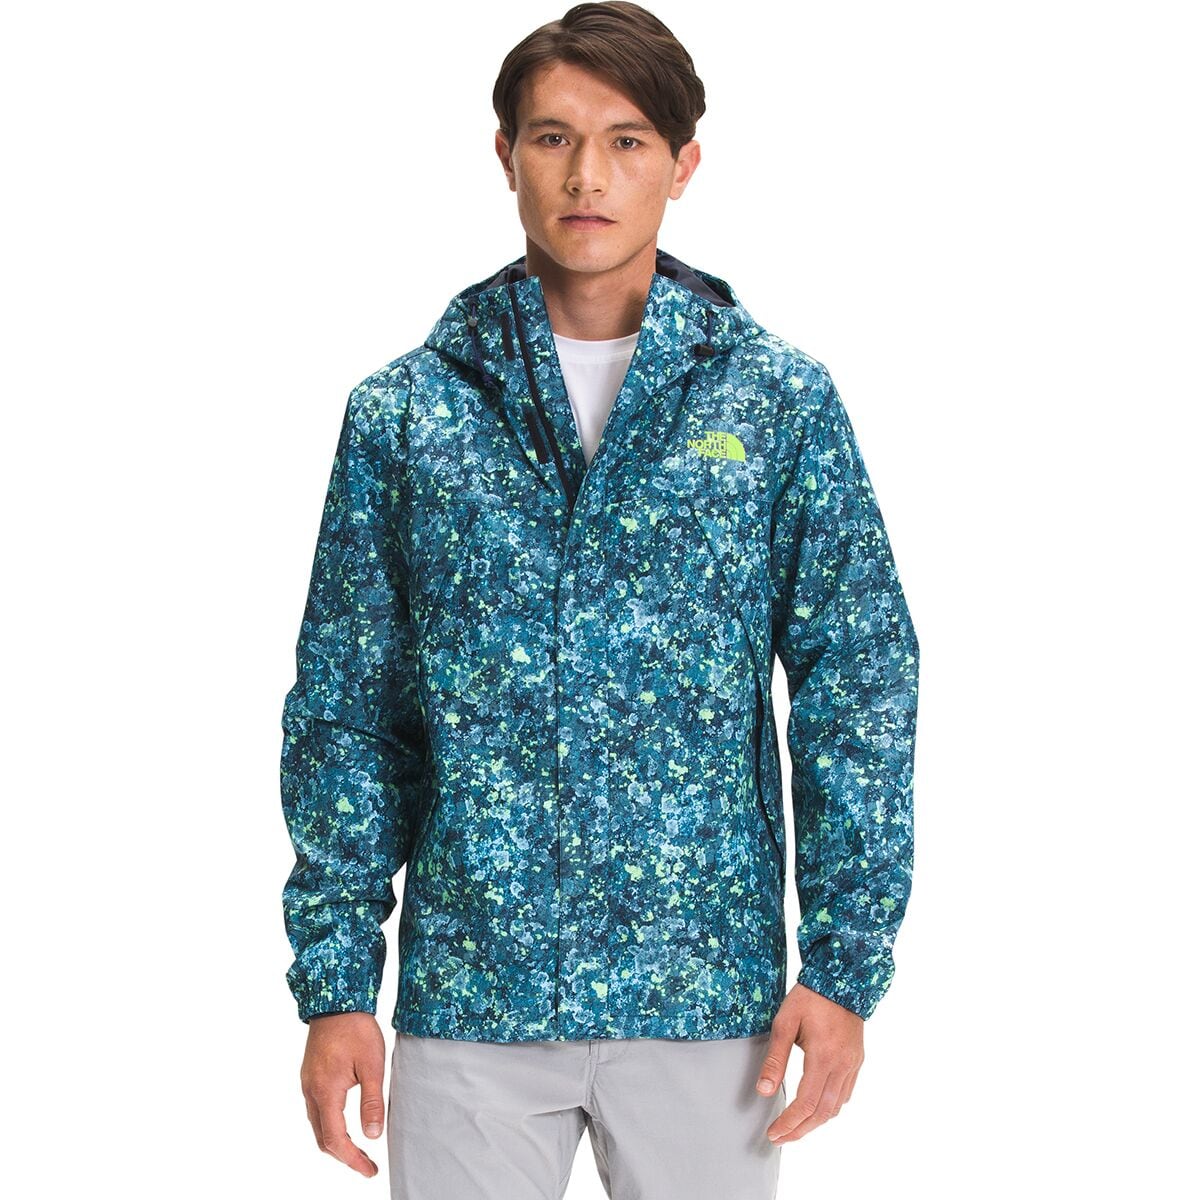 The North Face Antora Printed Jacket - Men's